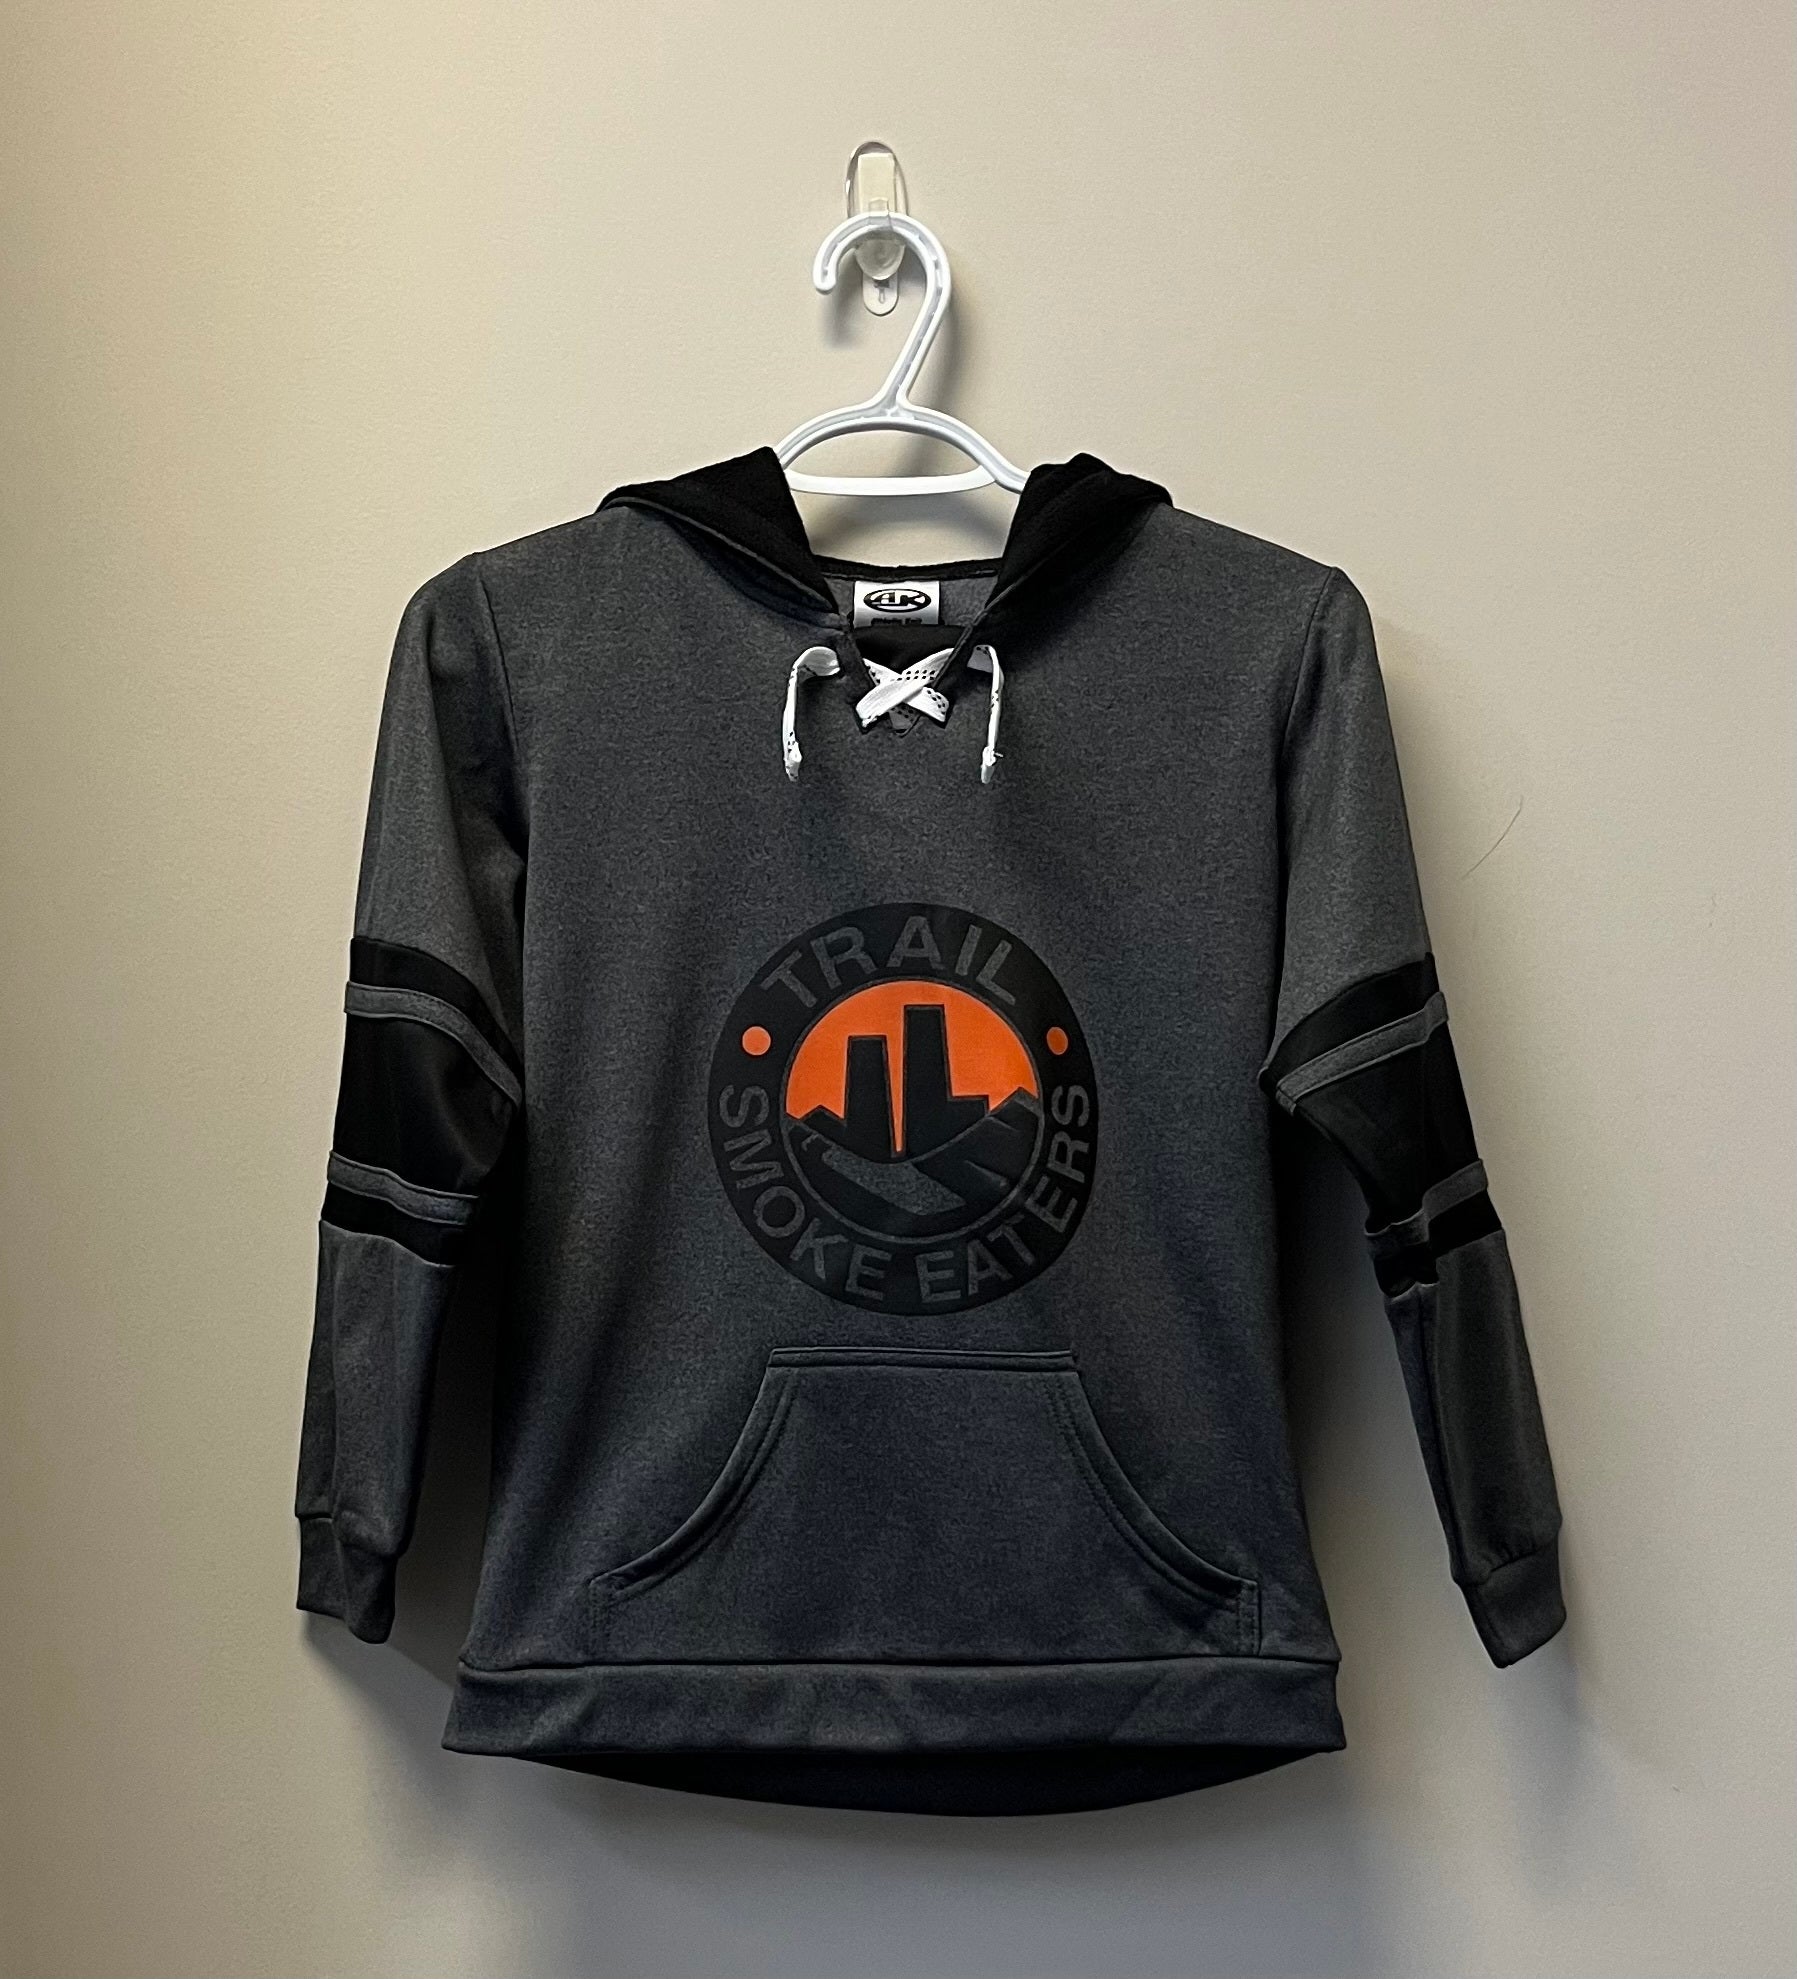 Our replica jerseys are here! Get - Trail Smoke Eaters